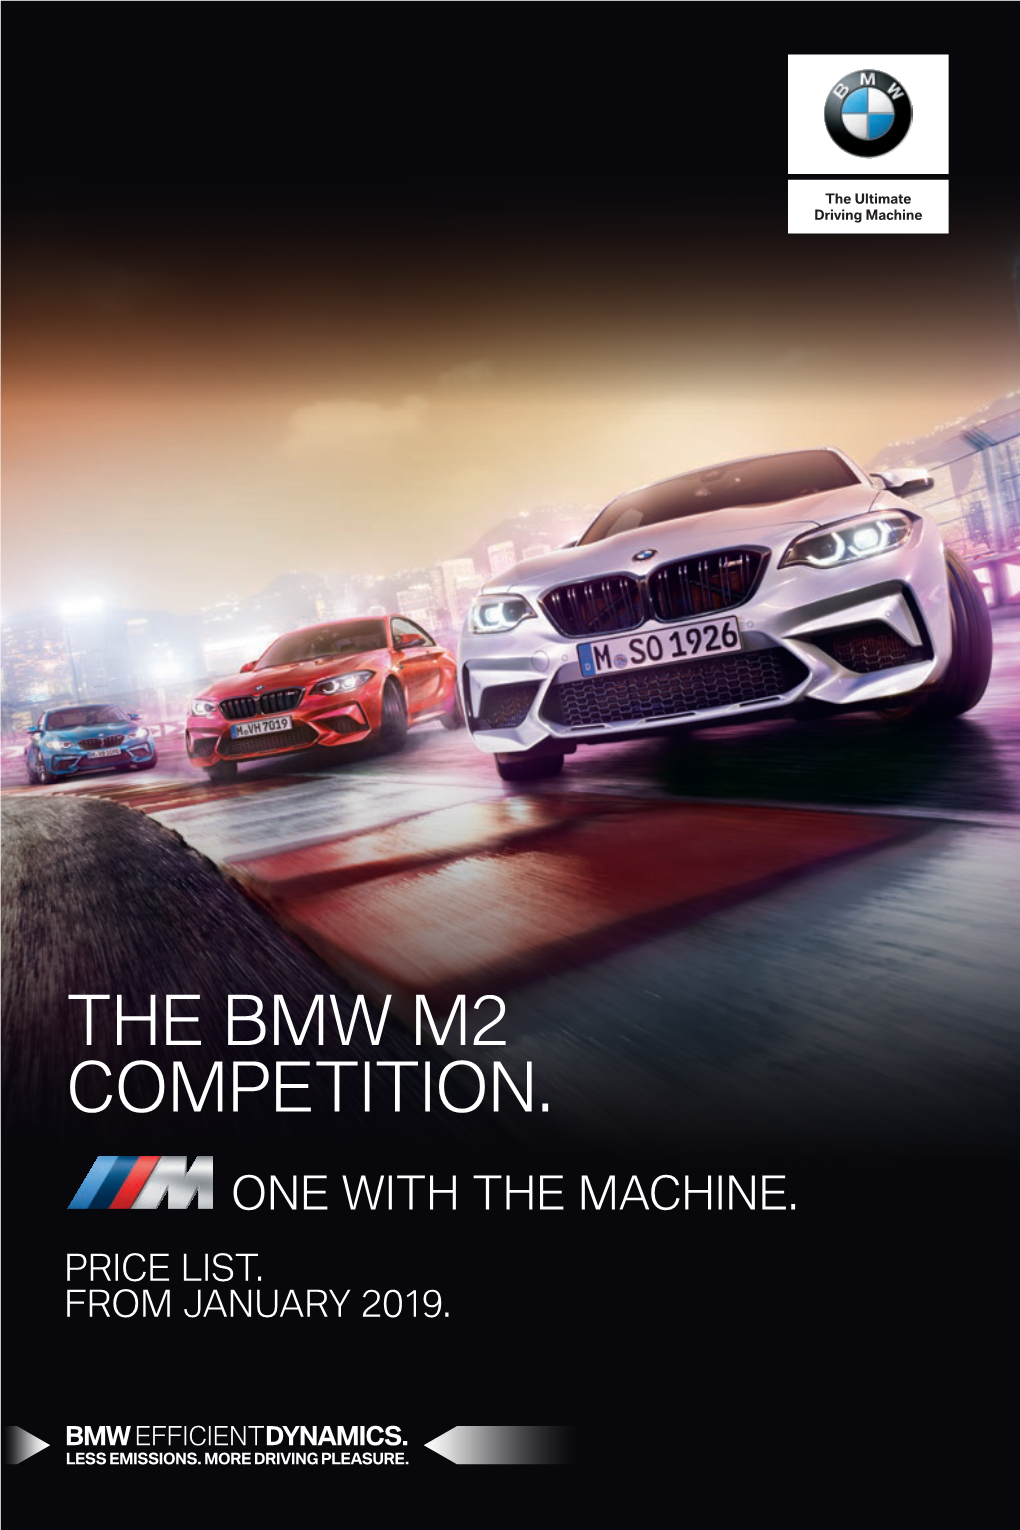 The Bmw M2 Competition. One with the Machine